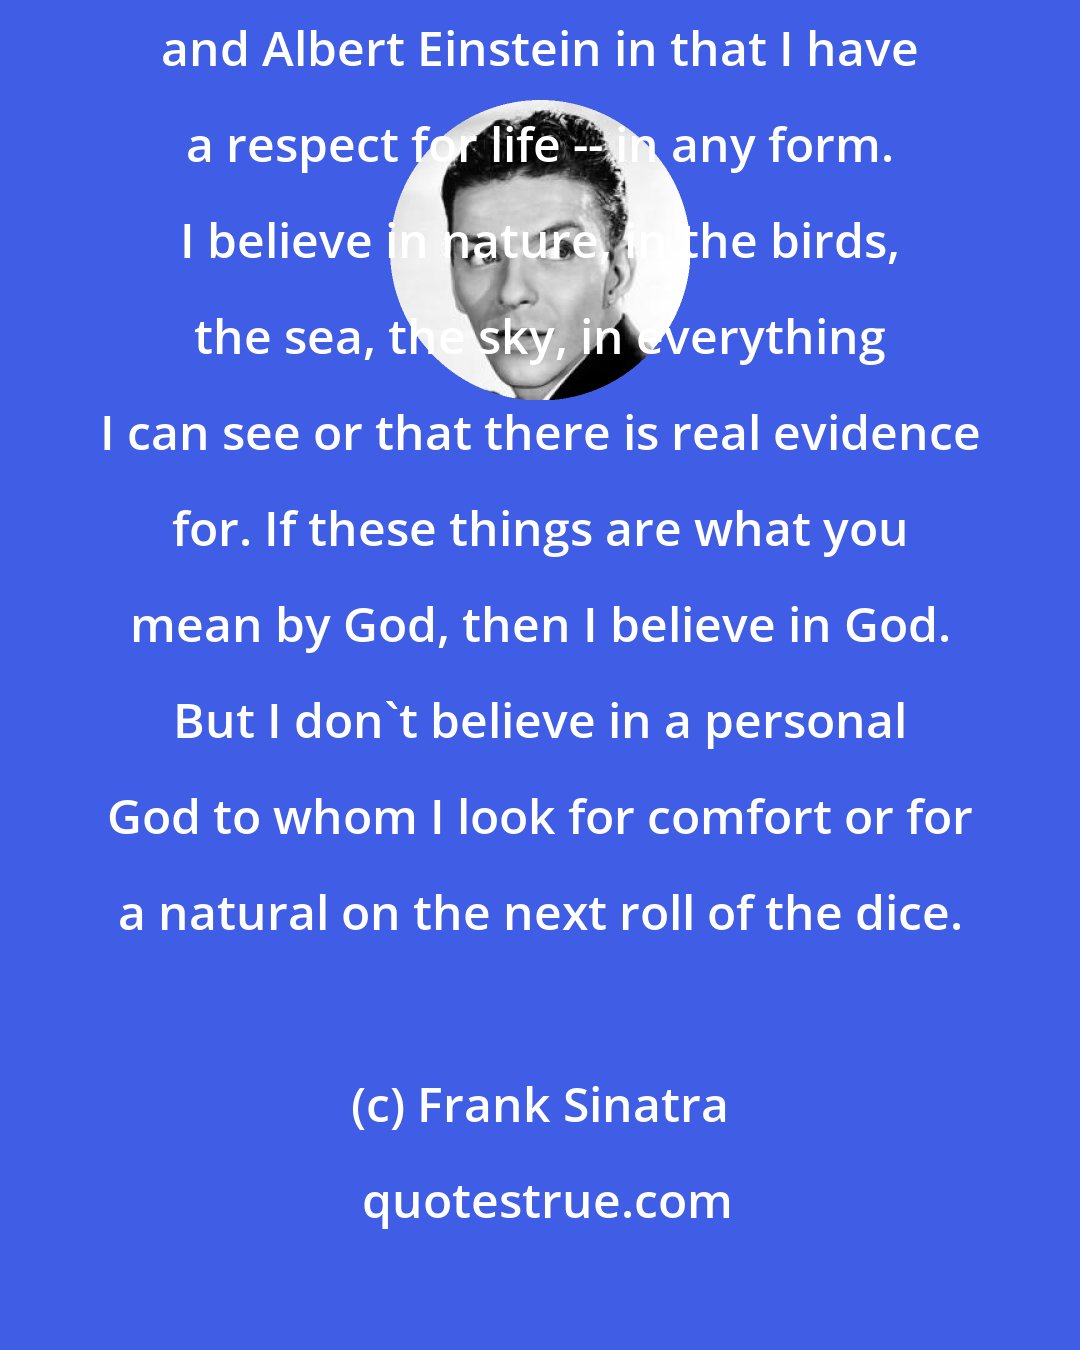 Frank Sinatra: I believe in you and me. I'm like Albert Schweitzer and Bertrand Russell and Albert Einstein in that I have a respect for life -- in any form. I believe in nature, in the birds, the sea, the sky, in everything I can see or that there is real evidence for. If these things are what you mean by God, then I believe in God. But I don't believe in a personal God to whom I look for comfort or for a natural on the next roll of the dice.